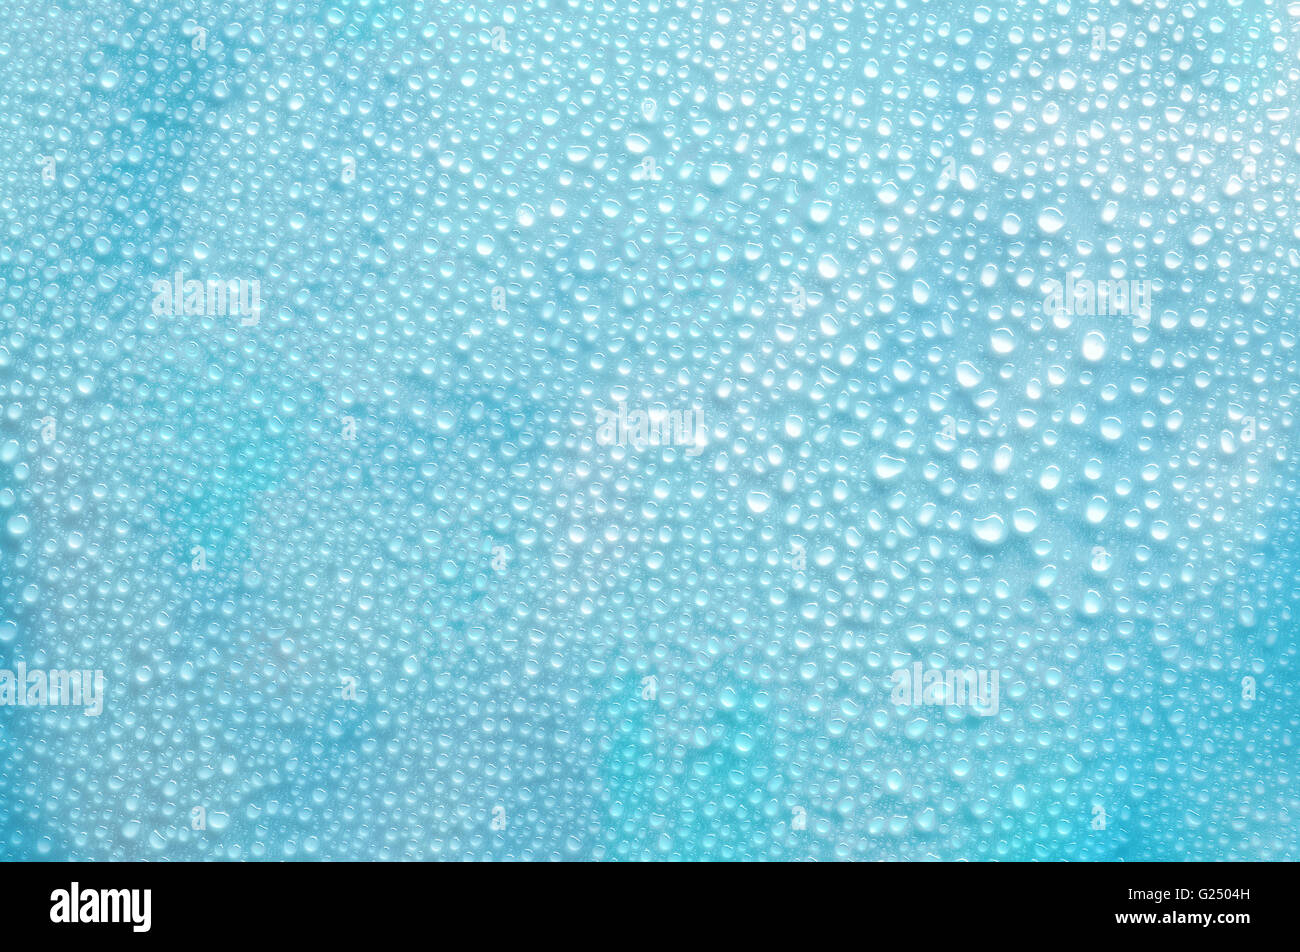 Water droplets on a flat surface, blue background Stock Photo